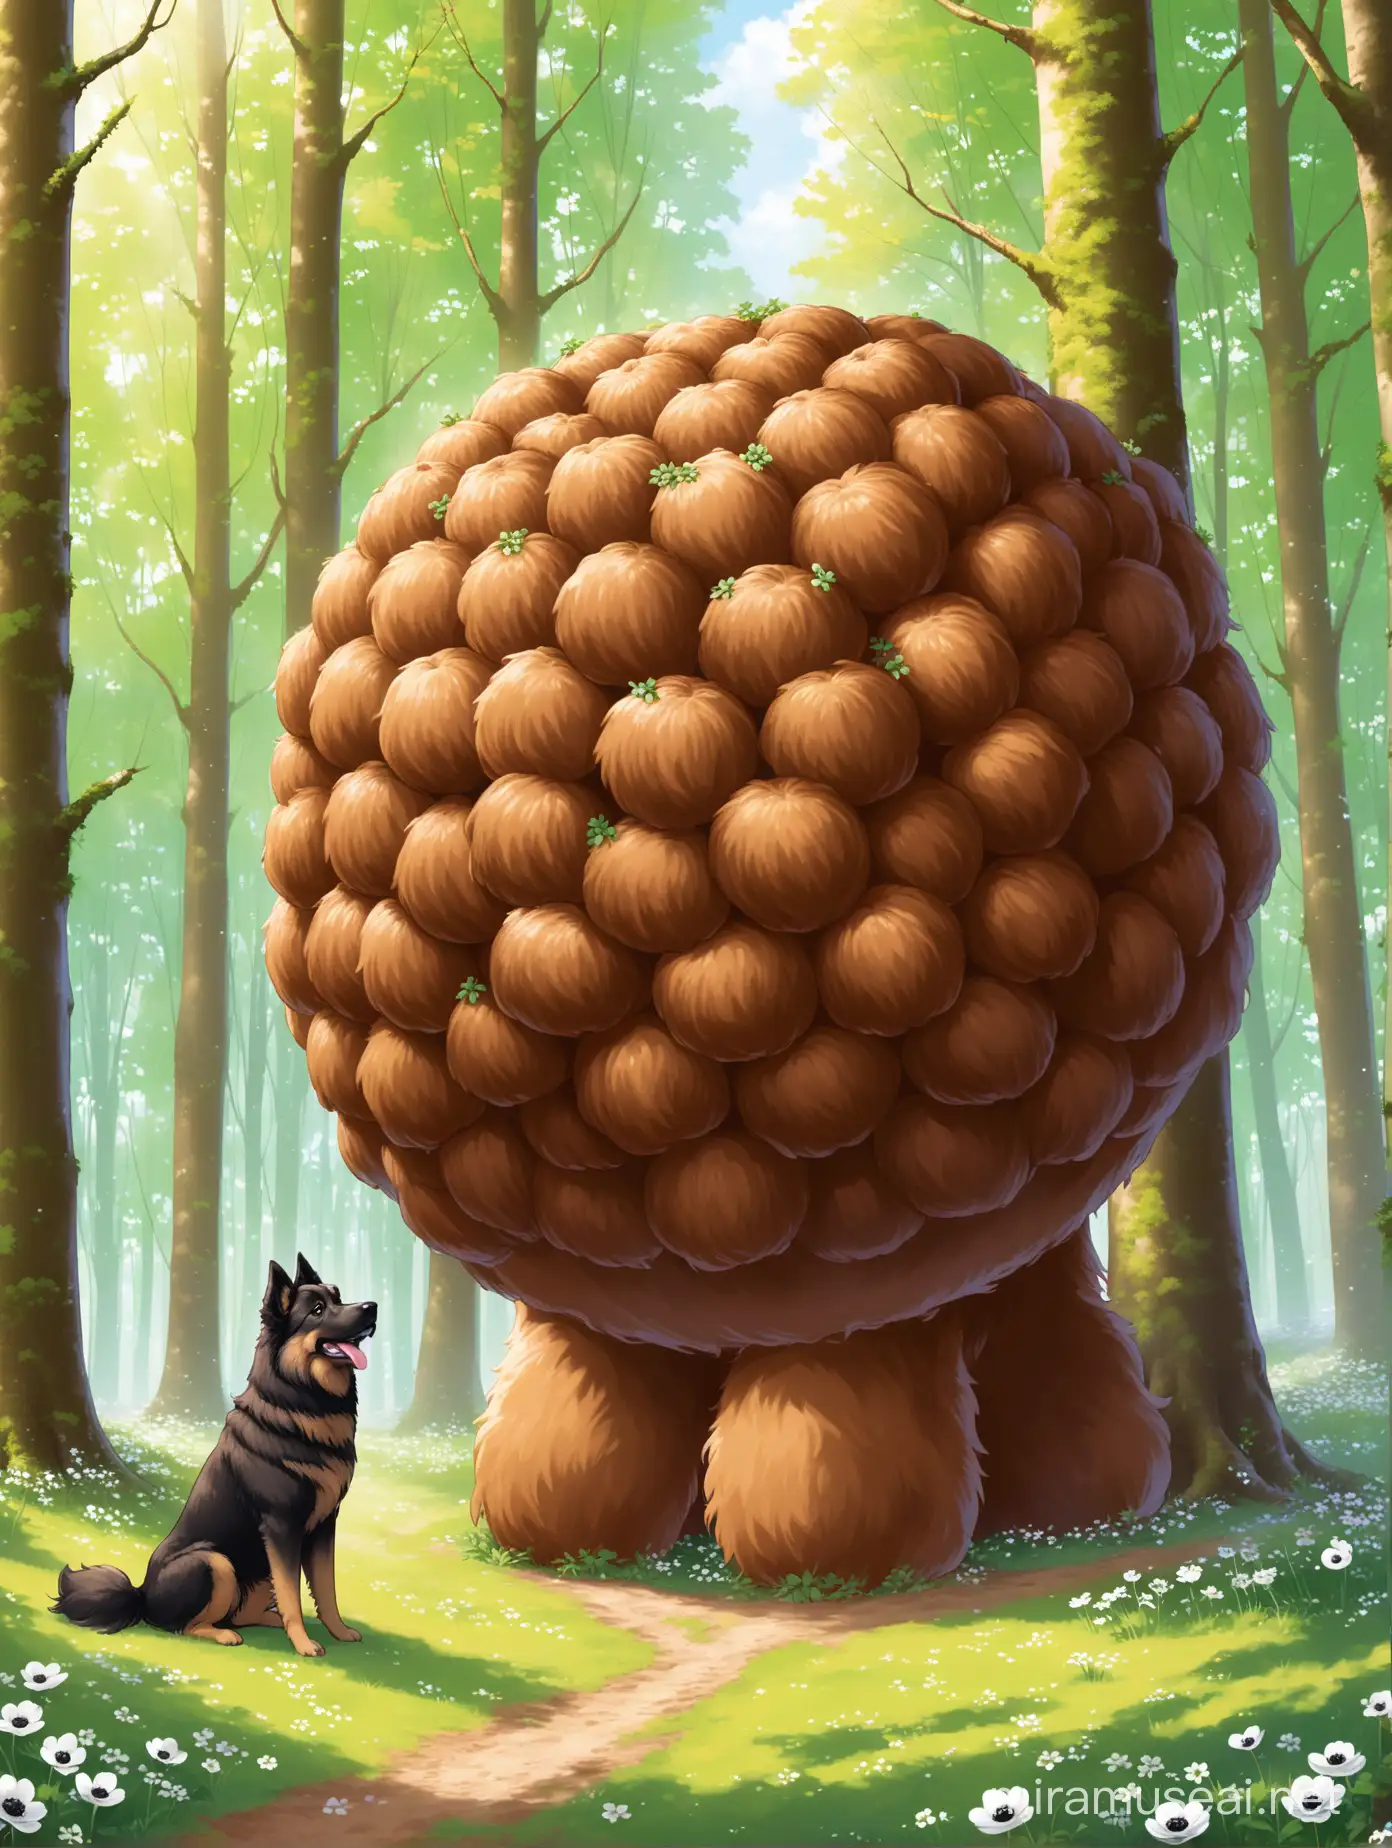 In a bright spring beech forest with white anemones on the ground, a very happy a Belgian Tervuren dog has found a gigant meatball as big as a tree. the Belgian Tervuren dog worships the big meatball
